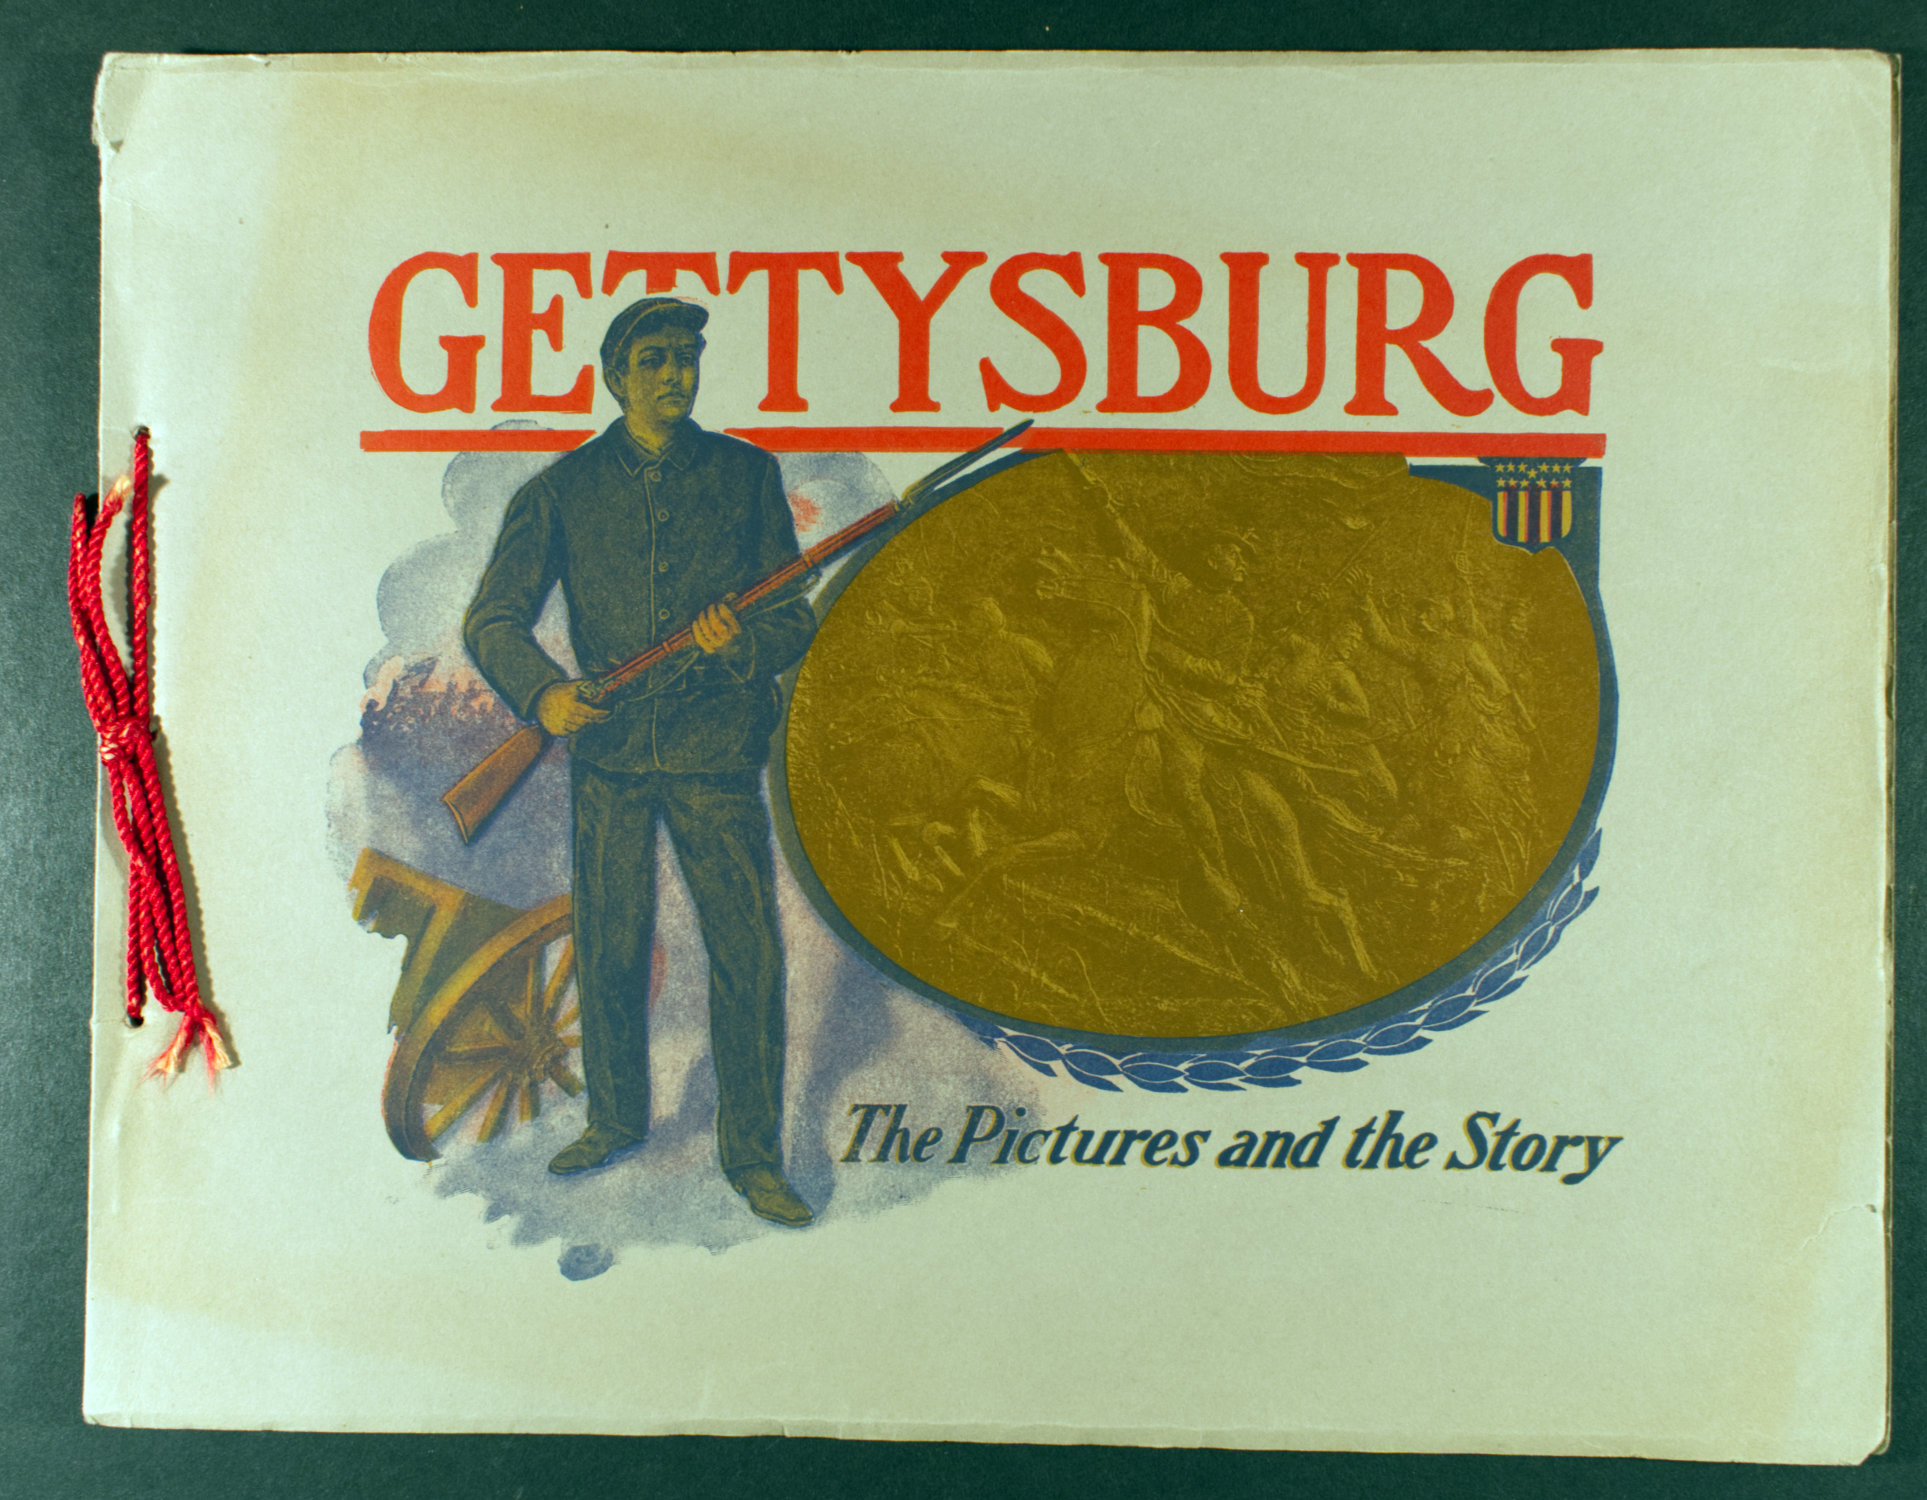 Gettysburg; the Pictures and the Story. 18th ed. Gettysburg: Tipton & Blocher, 1913.